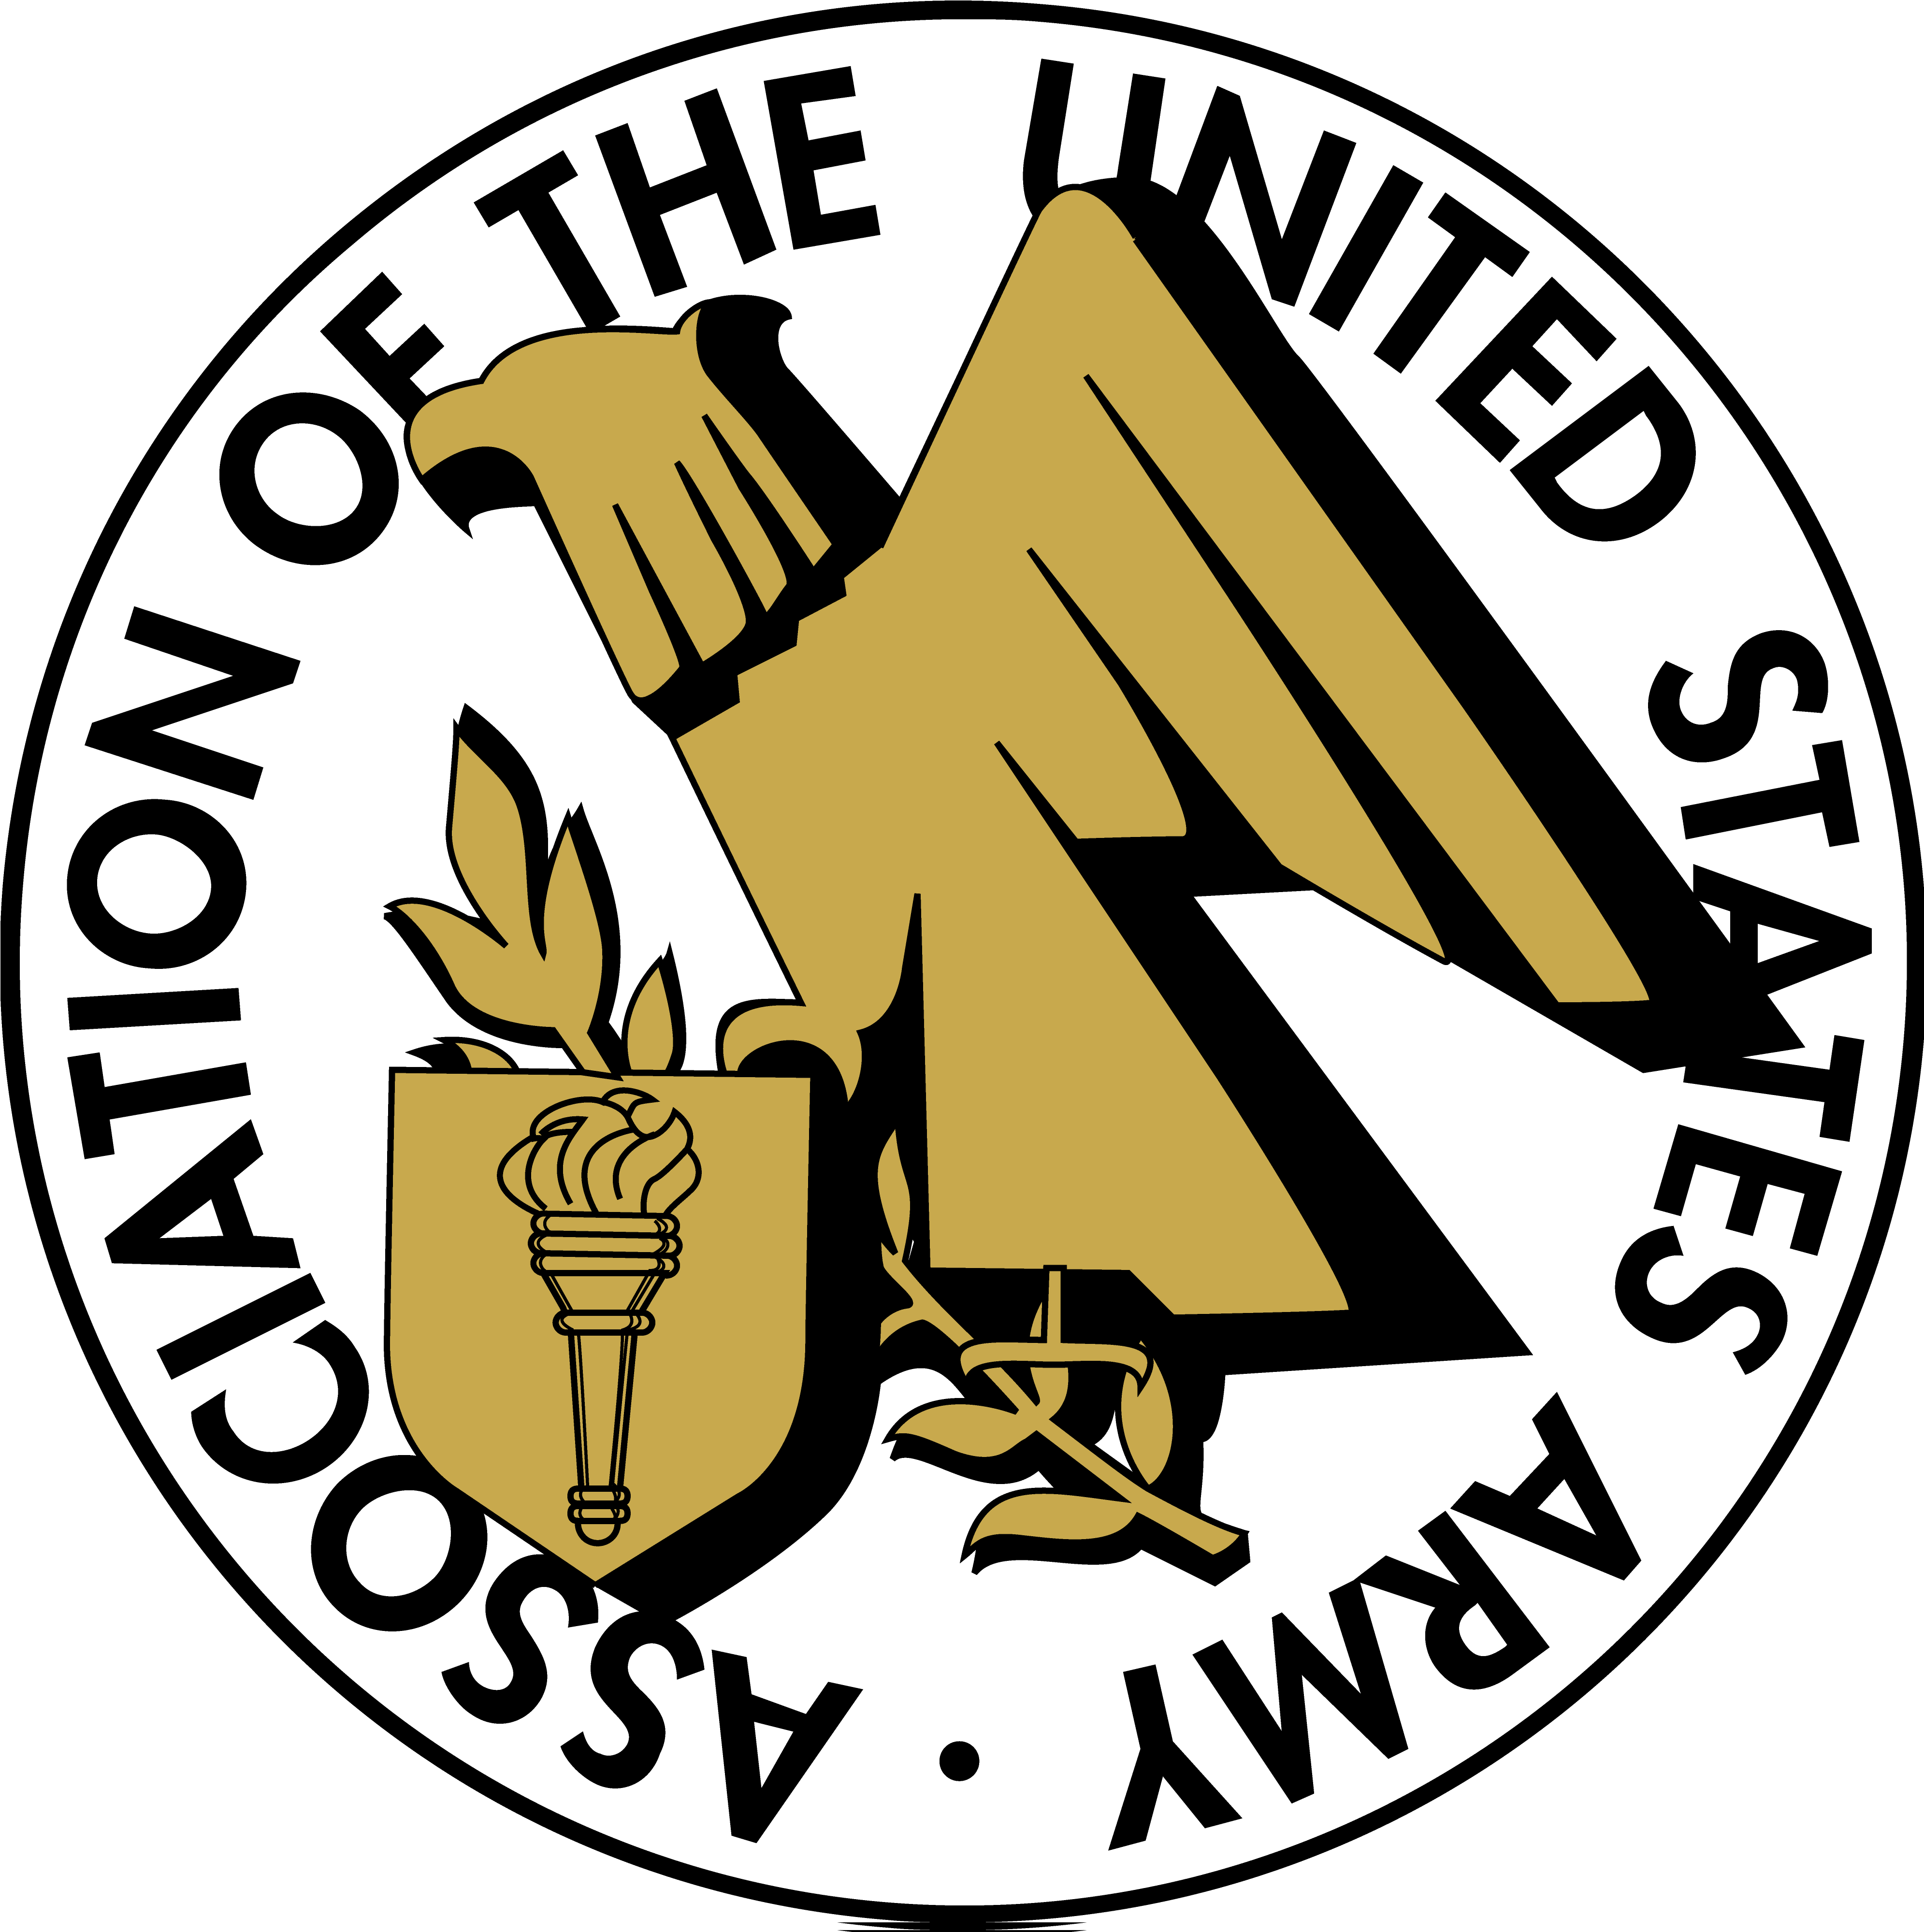 1 - Association Of The United States Army (4500x4500)